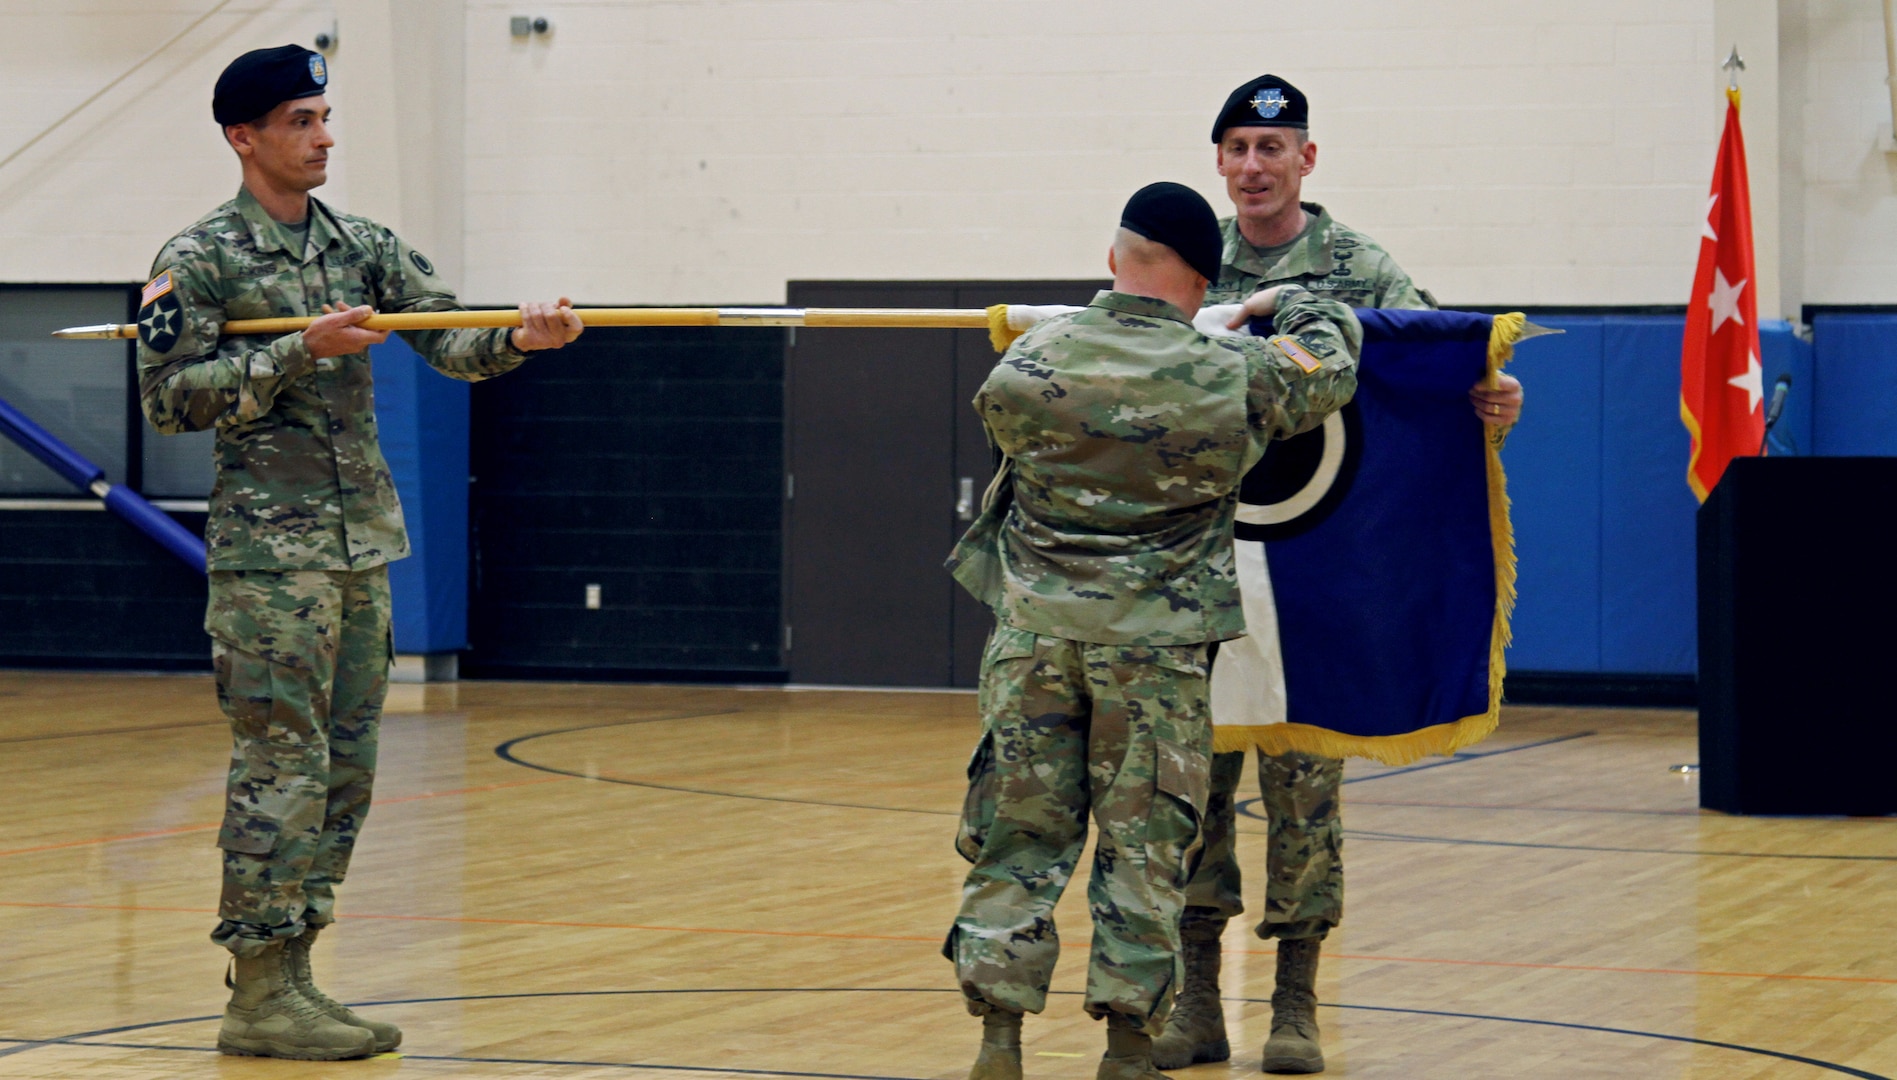 America’s First Corps Commanding General Lt. Gen. Gary Volesky and Lt. Col. Derek Bothern, battalion commander of the newly activated Intelligence, Information, Cyber, Electronic Warfare and Space Detachment unveil the I2CEWS unit flag during a ceremony Jan. 11, 2019, at Joint Base Lewis McChord, Washington. The ceremony marked the launch of the first-ever Intelligence, Information, Cyber, Electronic Warfare and Space Detachment in the U.S. Army. I2CEWS was designed to integrate cyber warfare, electronic warfare and space capabilities. (U.S. Army photo by Pvt. Caleb Minor)